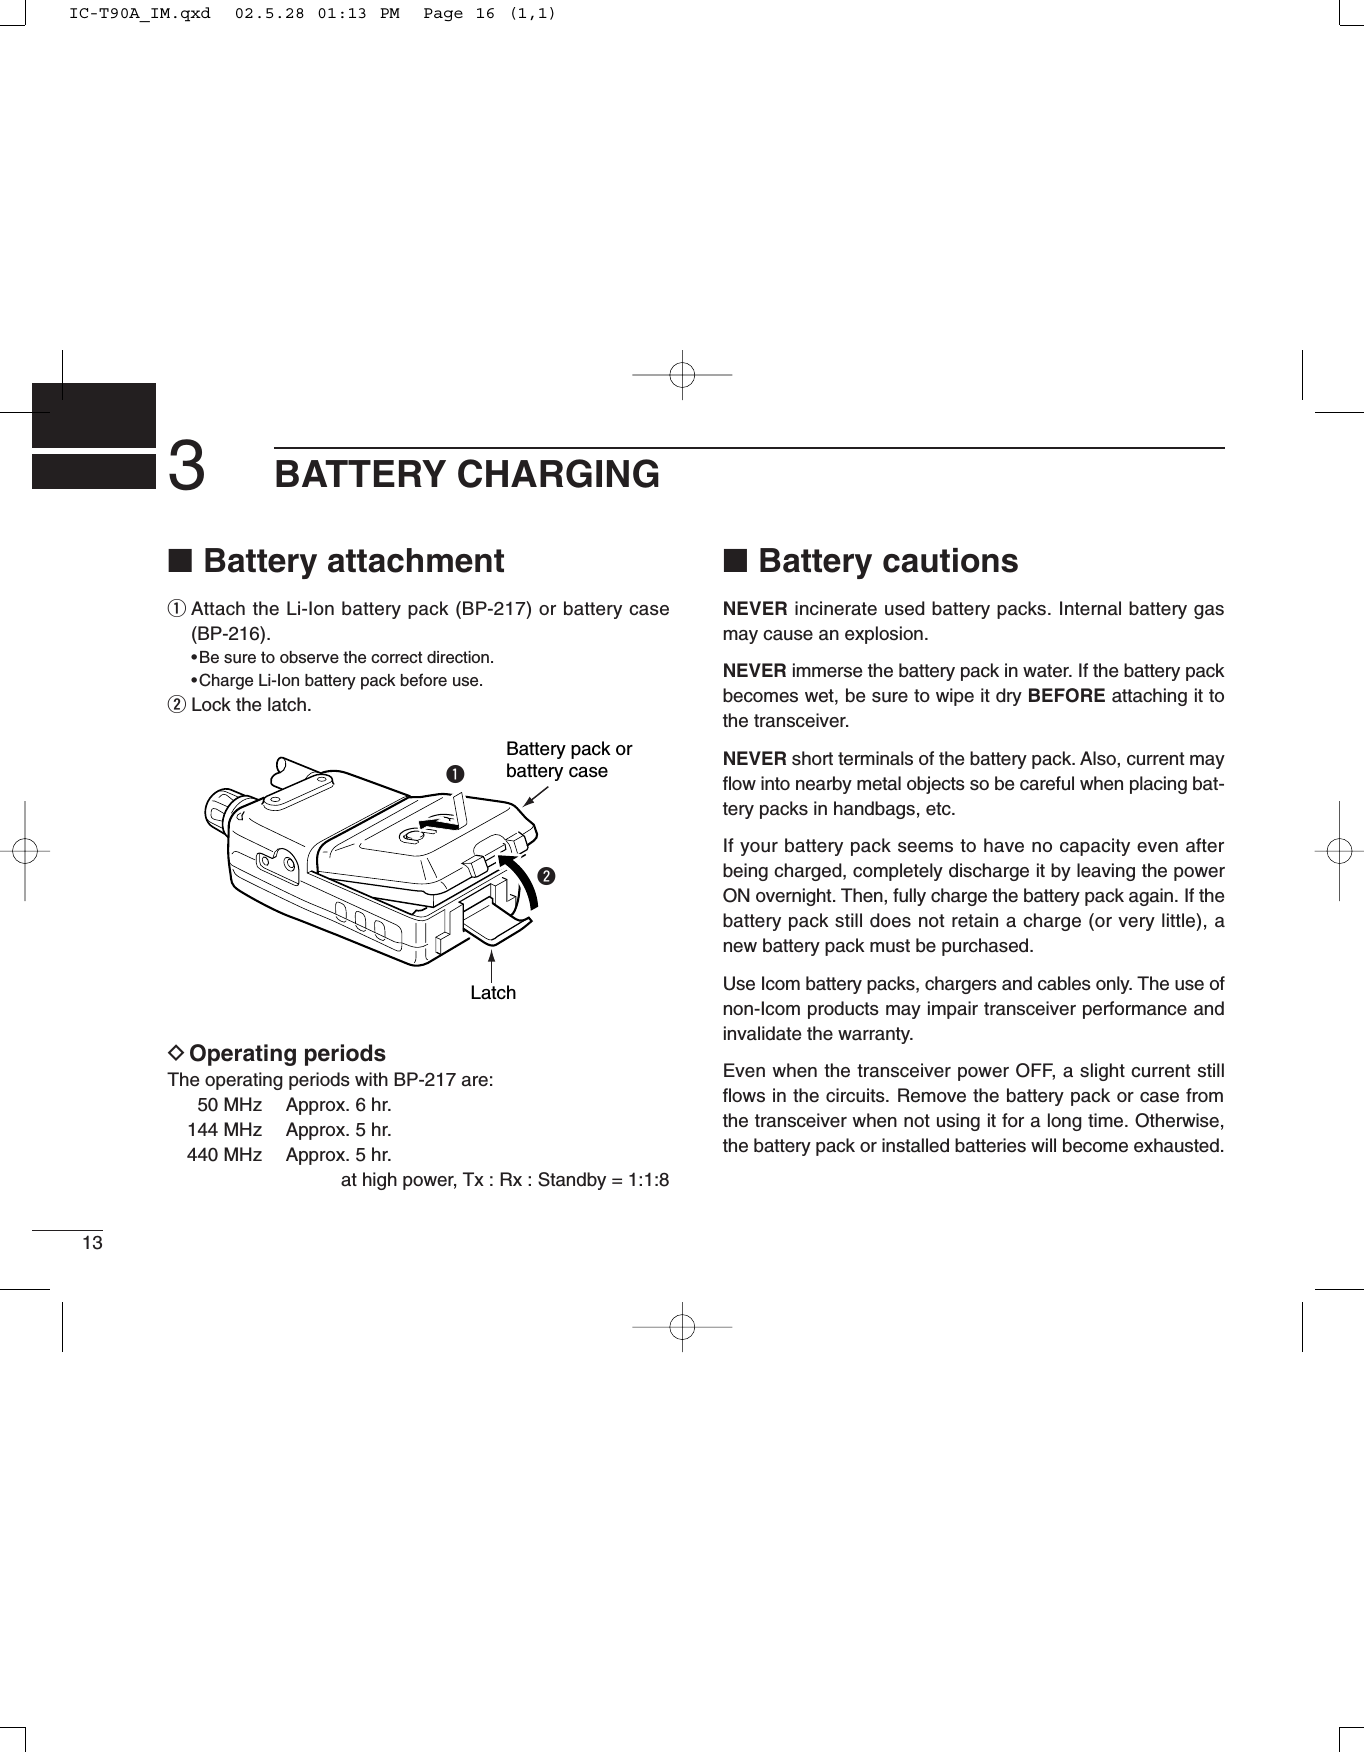 ■Battery attachmentqAttach the Li-Ion battery pack (BP-217) or battery case(BP-216).•Be sure to observe the correct direction.•Charge Li-Ion battery pack before use.wLock the latch.DOperating periodsThe operating periods with BP-217 are:50 MHz  Approx. 6 hr.144 MHz  Approx. 5 hr.440 MHz  Approx. 5 hr.at high power, Tx : Rx : Standby = 1:1:8■Battery cautionsNEVER incinerate used battery packs. Internal battery gasmay cause an explosion.NEVER immerse the battery pack in water. If the battery packbecomes wet, be sure to wipe it dry BEFORE attaching it tothe transceiver.NEVER short terminals of the battery pack. Also, current mayﬂow into nearby metal objects so be careful when placing bat-tery packs in handbags, etc.If your battery pack seems to have no capacity even afterbeing charged, completely discharge it by leaving the powerON overnight. Then, fully charge the battery pack again. If thebattery pack still does not retain a charge (or very little), anew battery pack must be purchased.Use Icom battery packs, chargers and cables only. The use ofnon-Icom products may impair transceiver performance andinvalidate the warranty.Even when the transceiver power OFF, a slight current stillﬂows in the circuits. Remove the battery pack or case fromthe transceiver when not using it for a long time. Otherwise,the battery pack or installed batteries will become exhausted.Battery pack orbattery caseLatchqw3BATTERY CHARGING13IC-T90A_IM.qxd  02.5.28 01:13 PM  Page 16 (1,1)